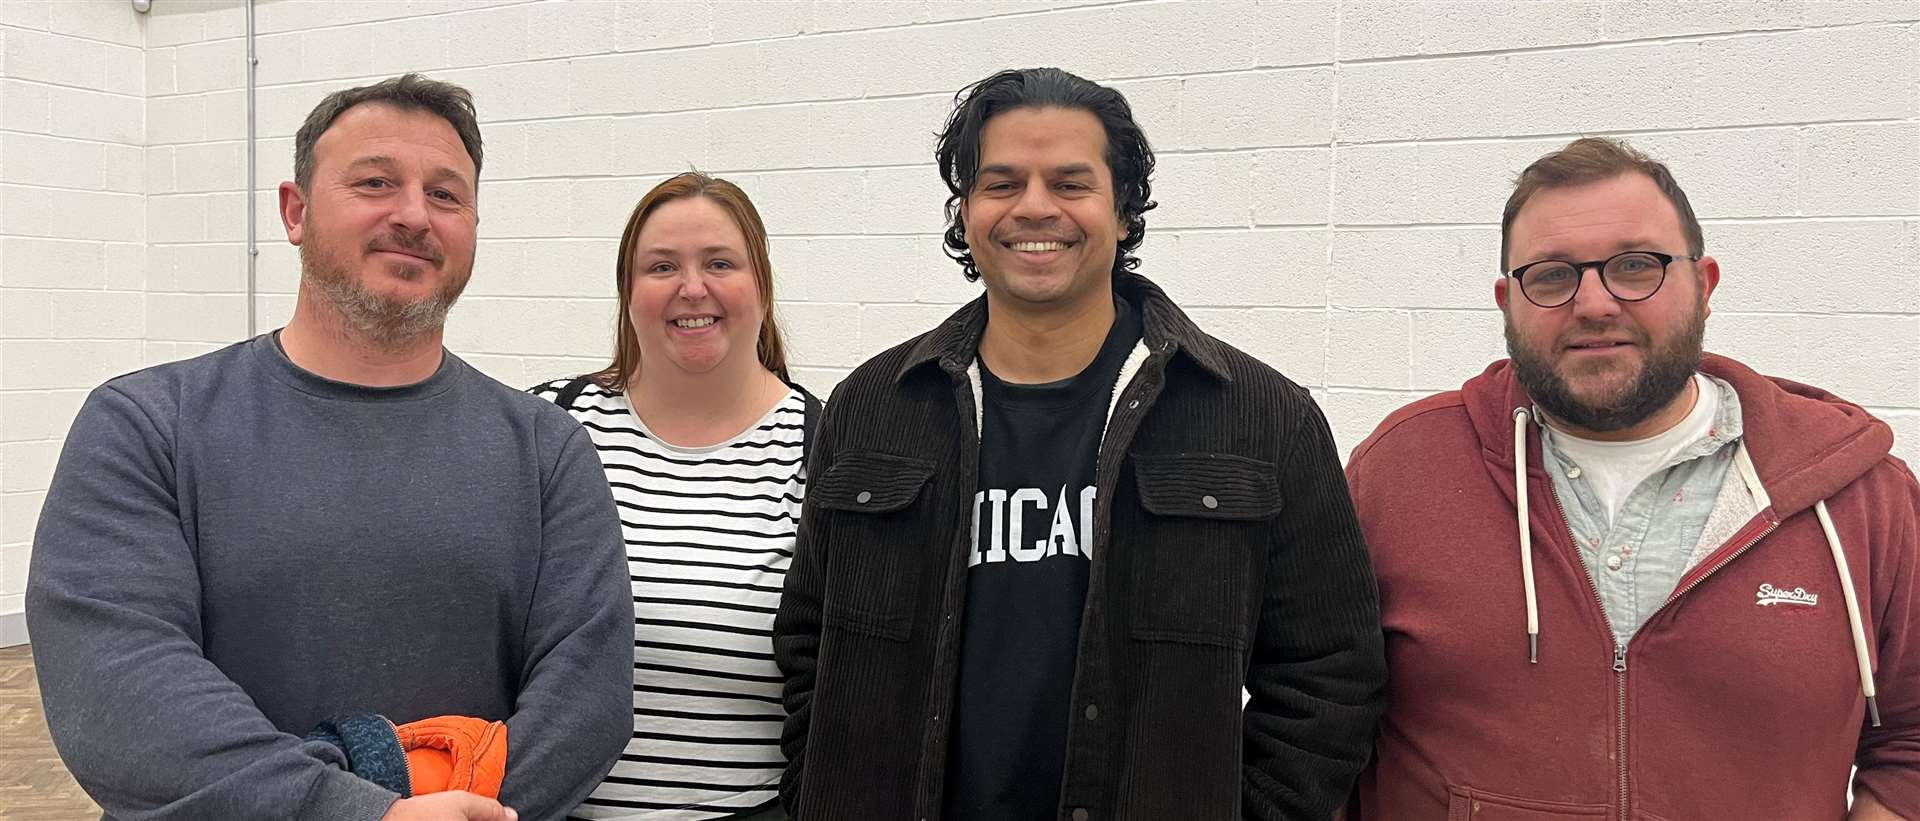 Peters Village residents Robert Gailer, Ellie Drake, Shekhar Karande and Matthew Clemens-Larry have set up a residents association to help fight the service charge issue